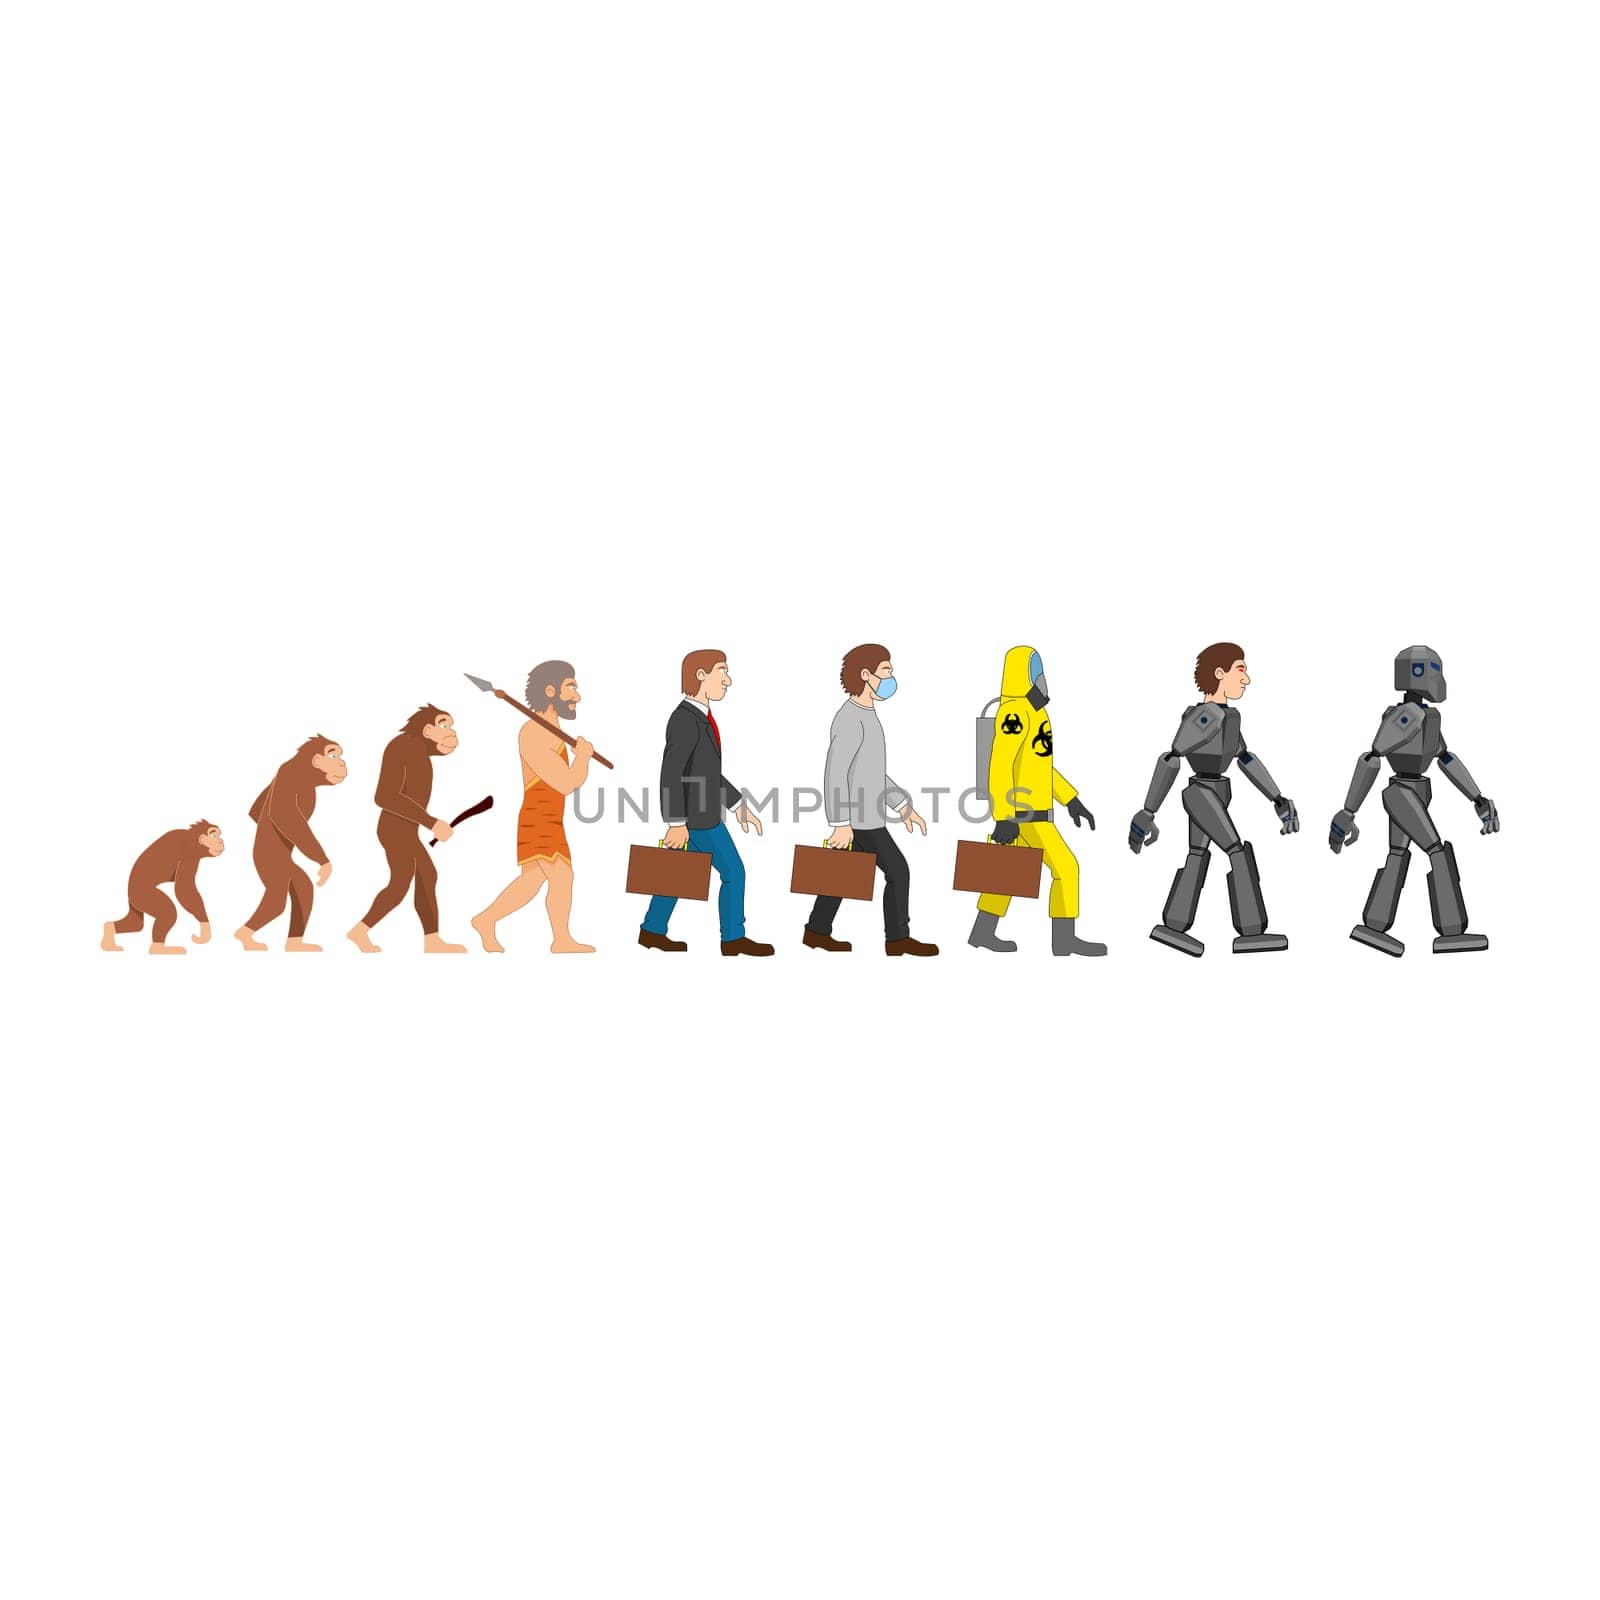 A funny human evolution timeline from times of monkey to future of robot men.